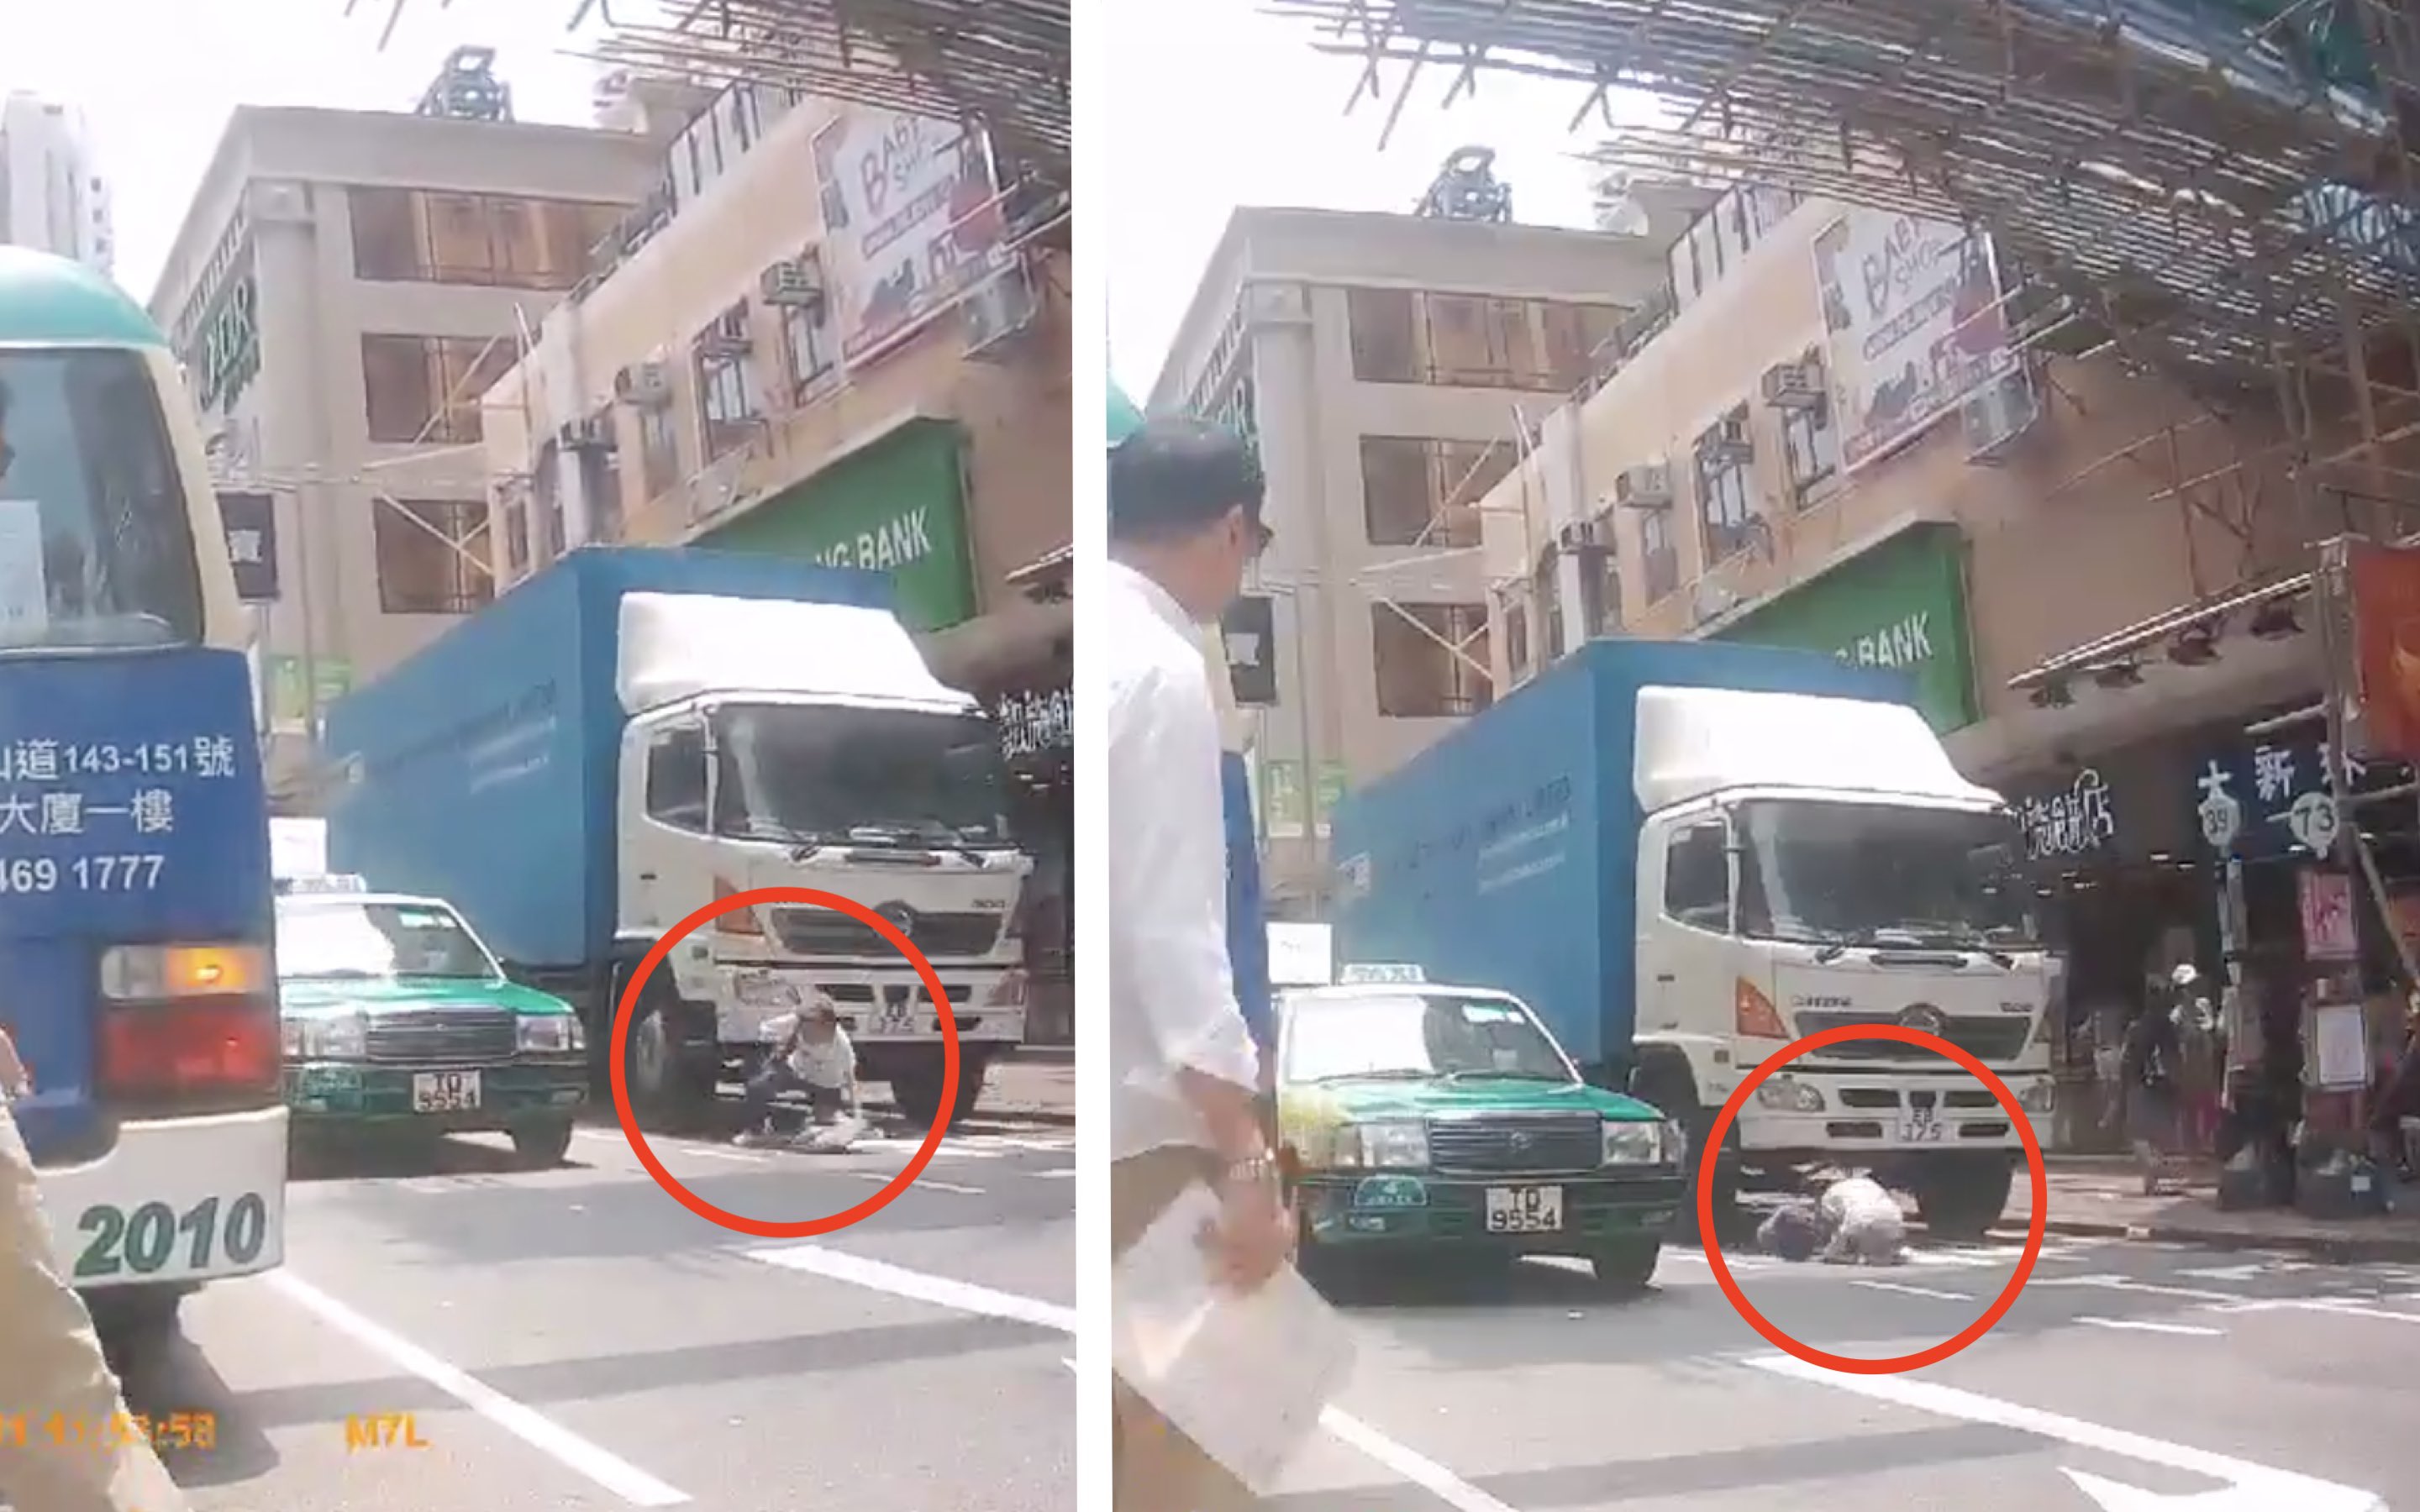 Dash cam video posted online shows the elderly woman being knocked over by a heavy truck. Screengrab via Facebook video/Kuro Dai.